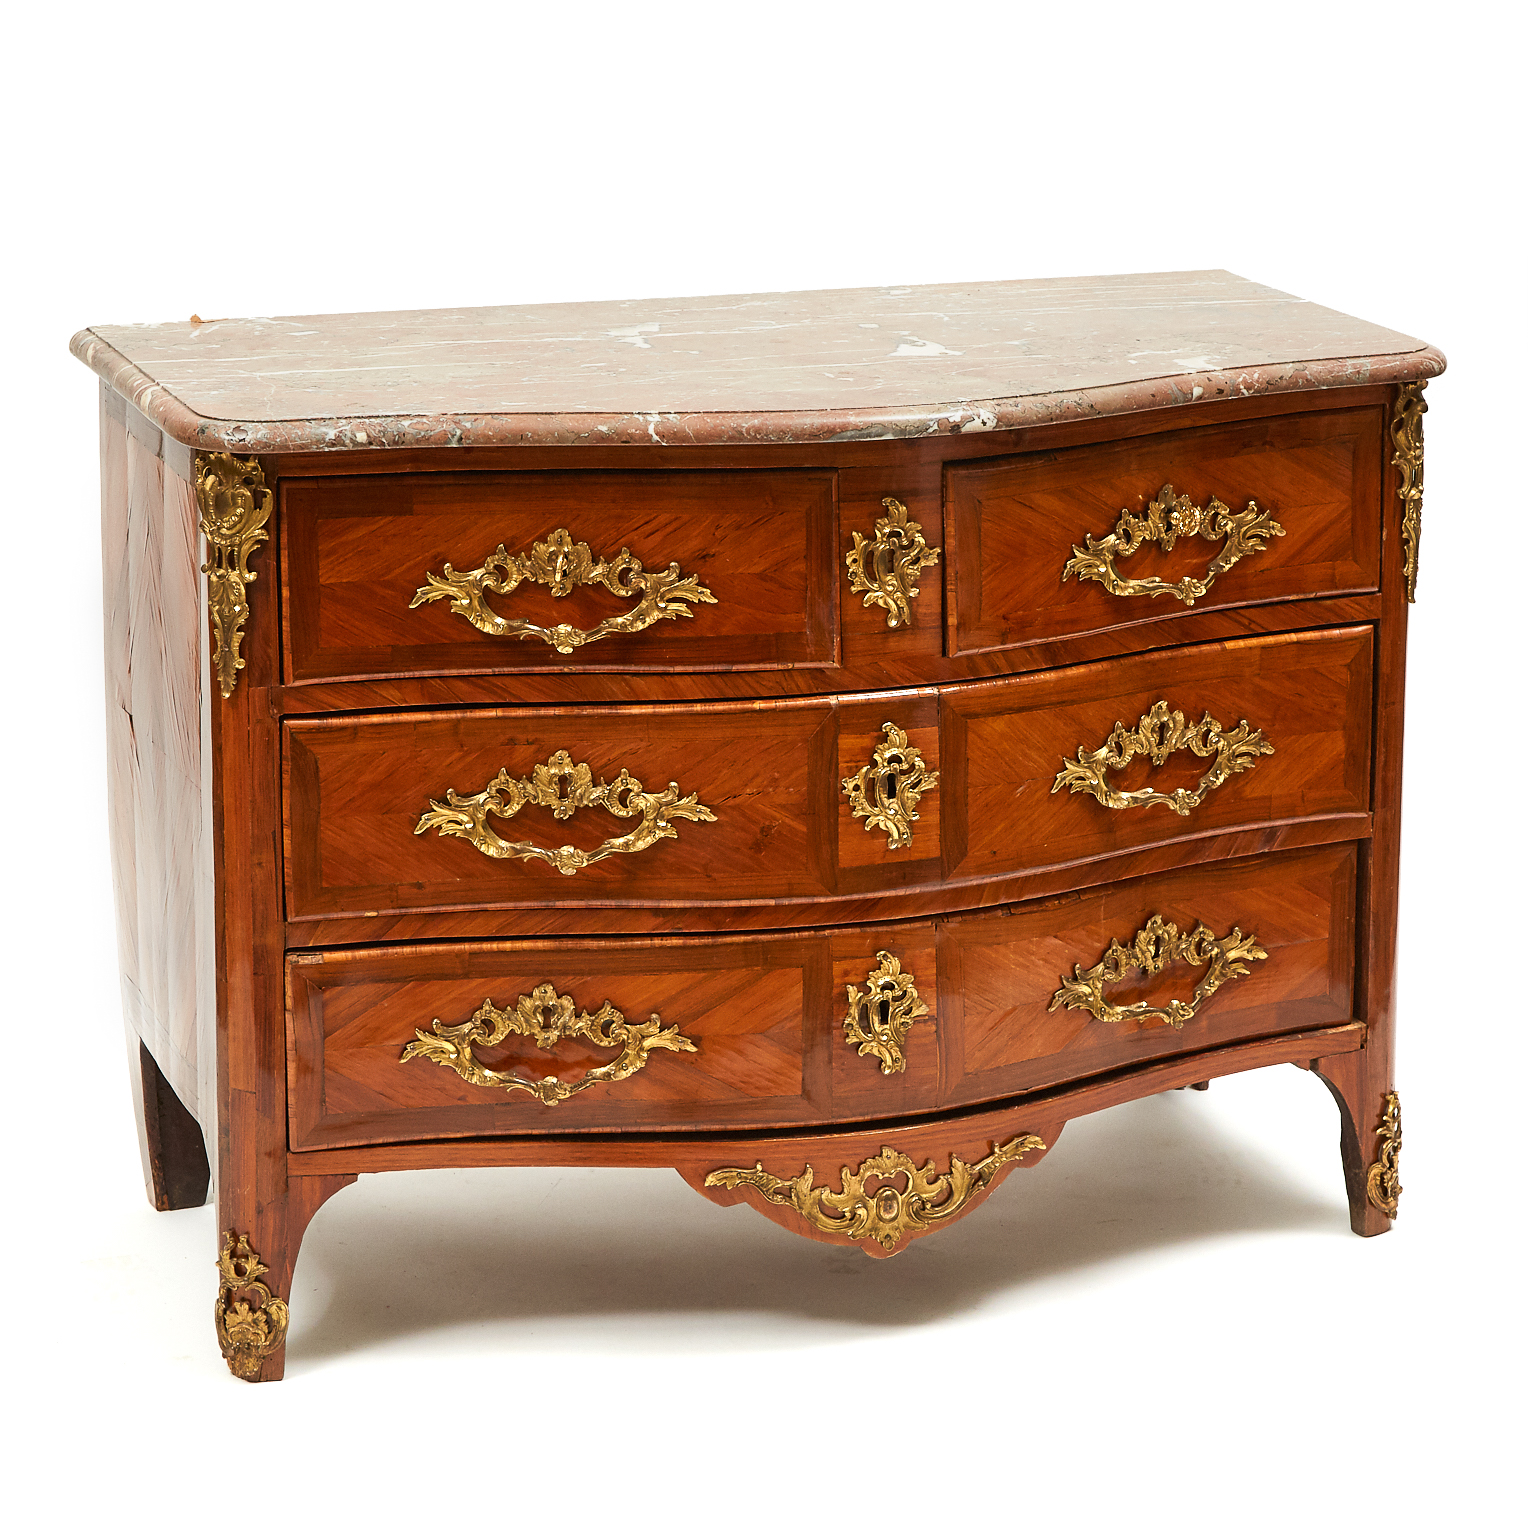 French Regencé Style Ormolu Mounted Tulipwood Parquetry Commode, 19th cetnury